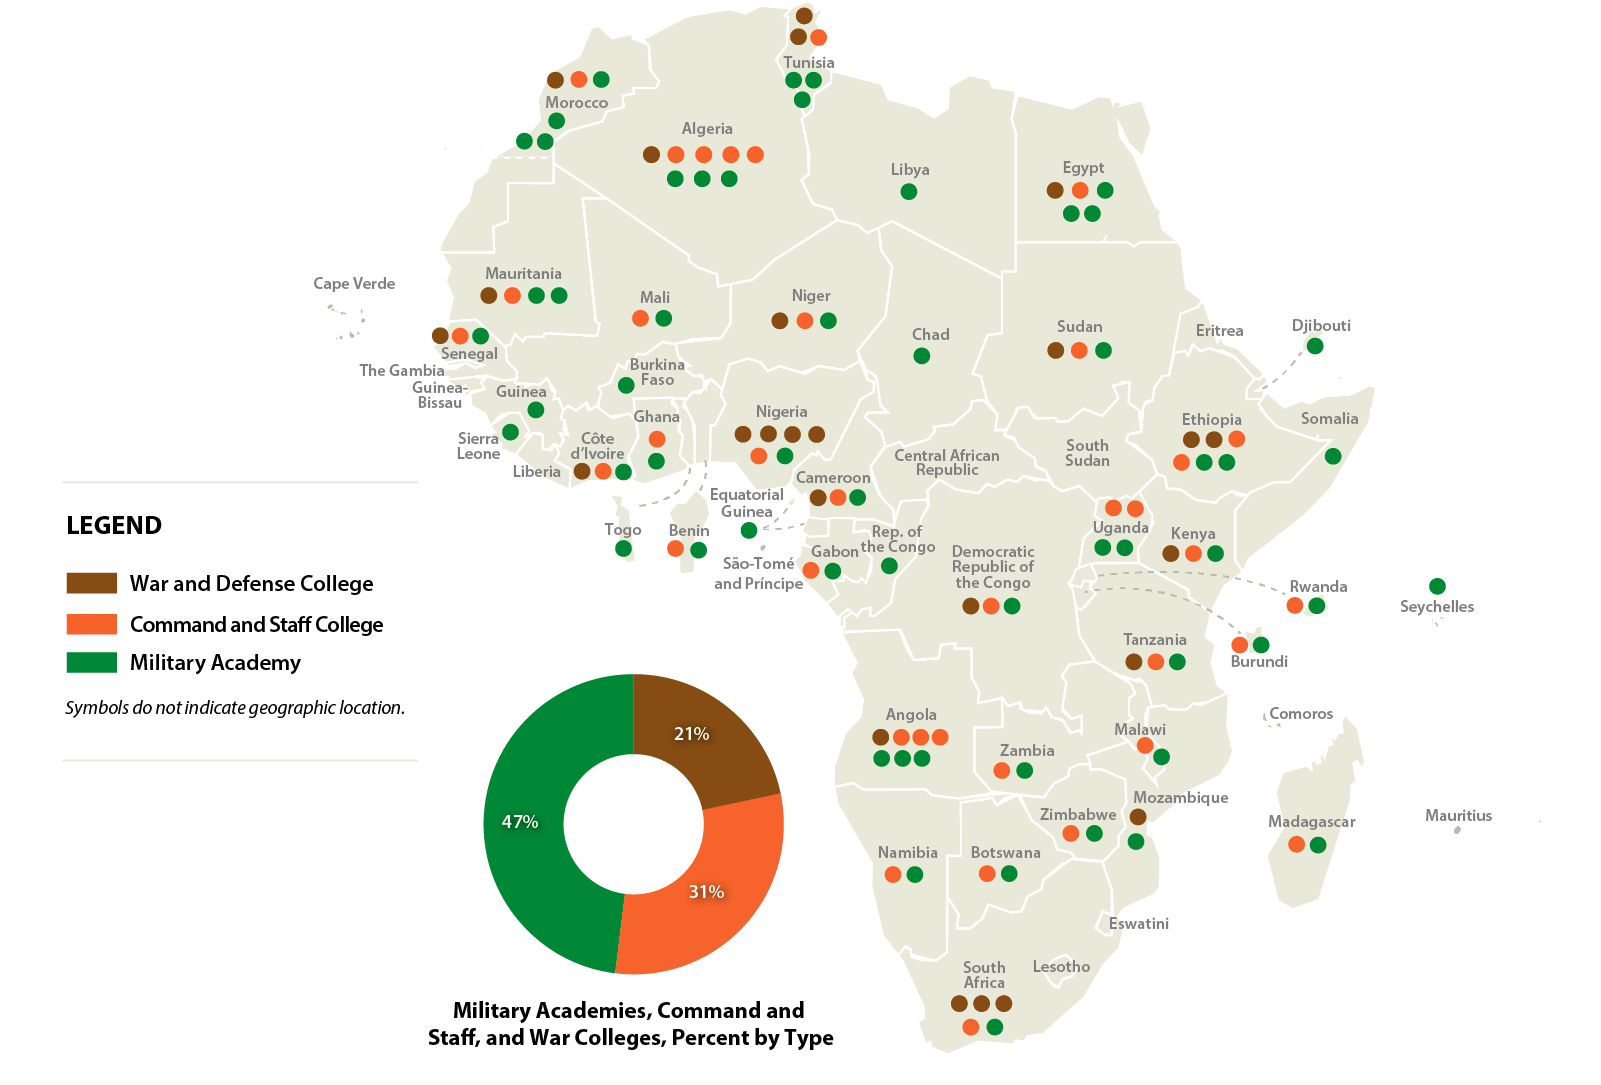 Professional Military Education Institutions in Africa